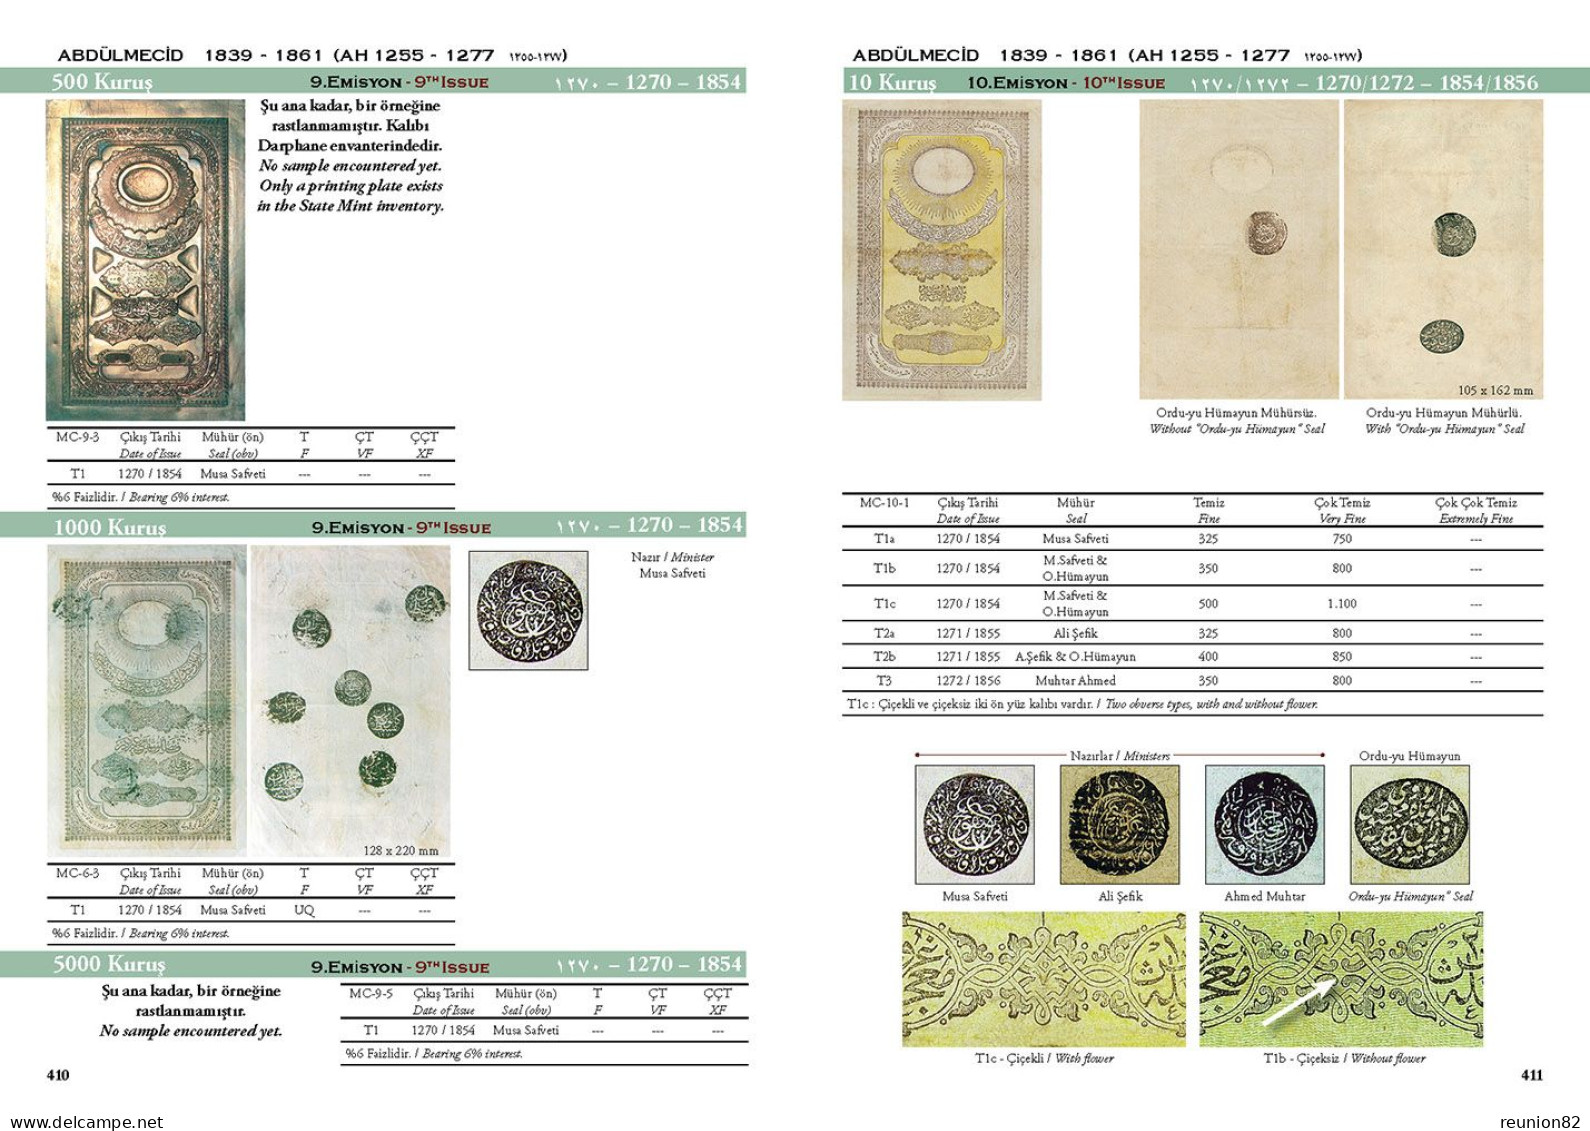 NEW * Turkish Republic & Ottoman Empire Banknotes Coins Medals Catalog 1839-2023